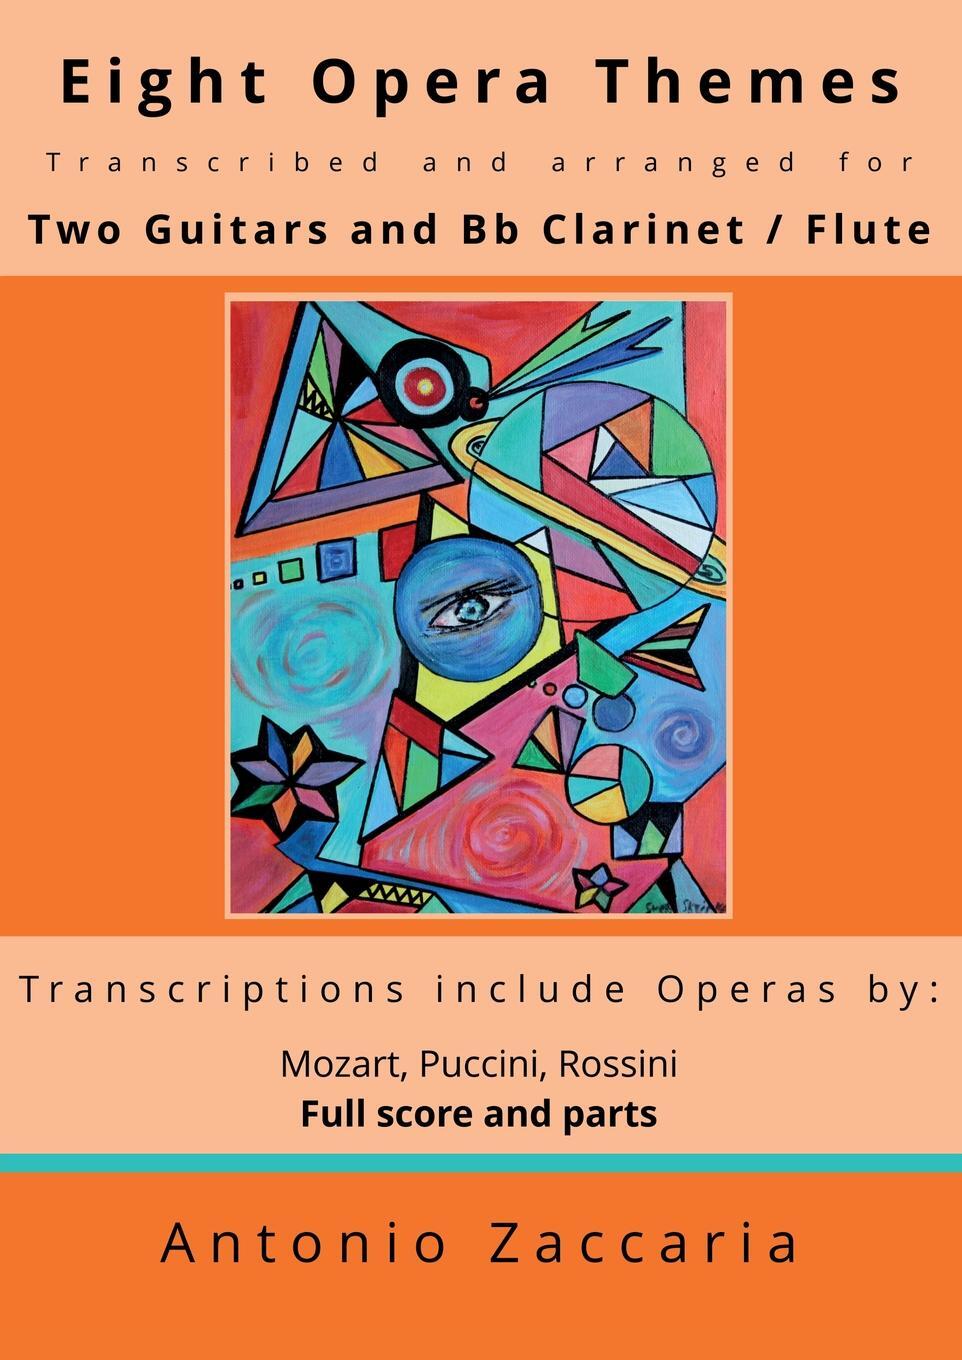 фото Eight opera themes transcribed and arranged for two guitars and Bb clarinet / flute